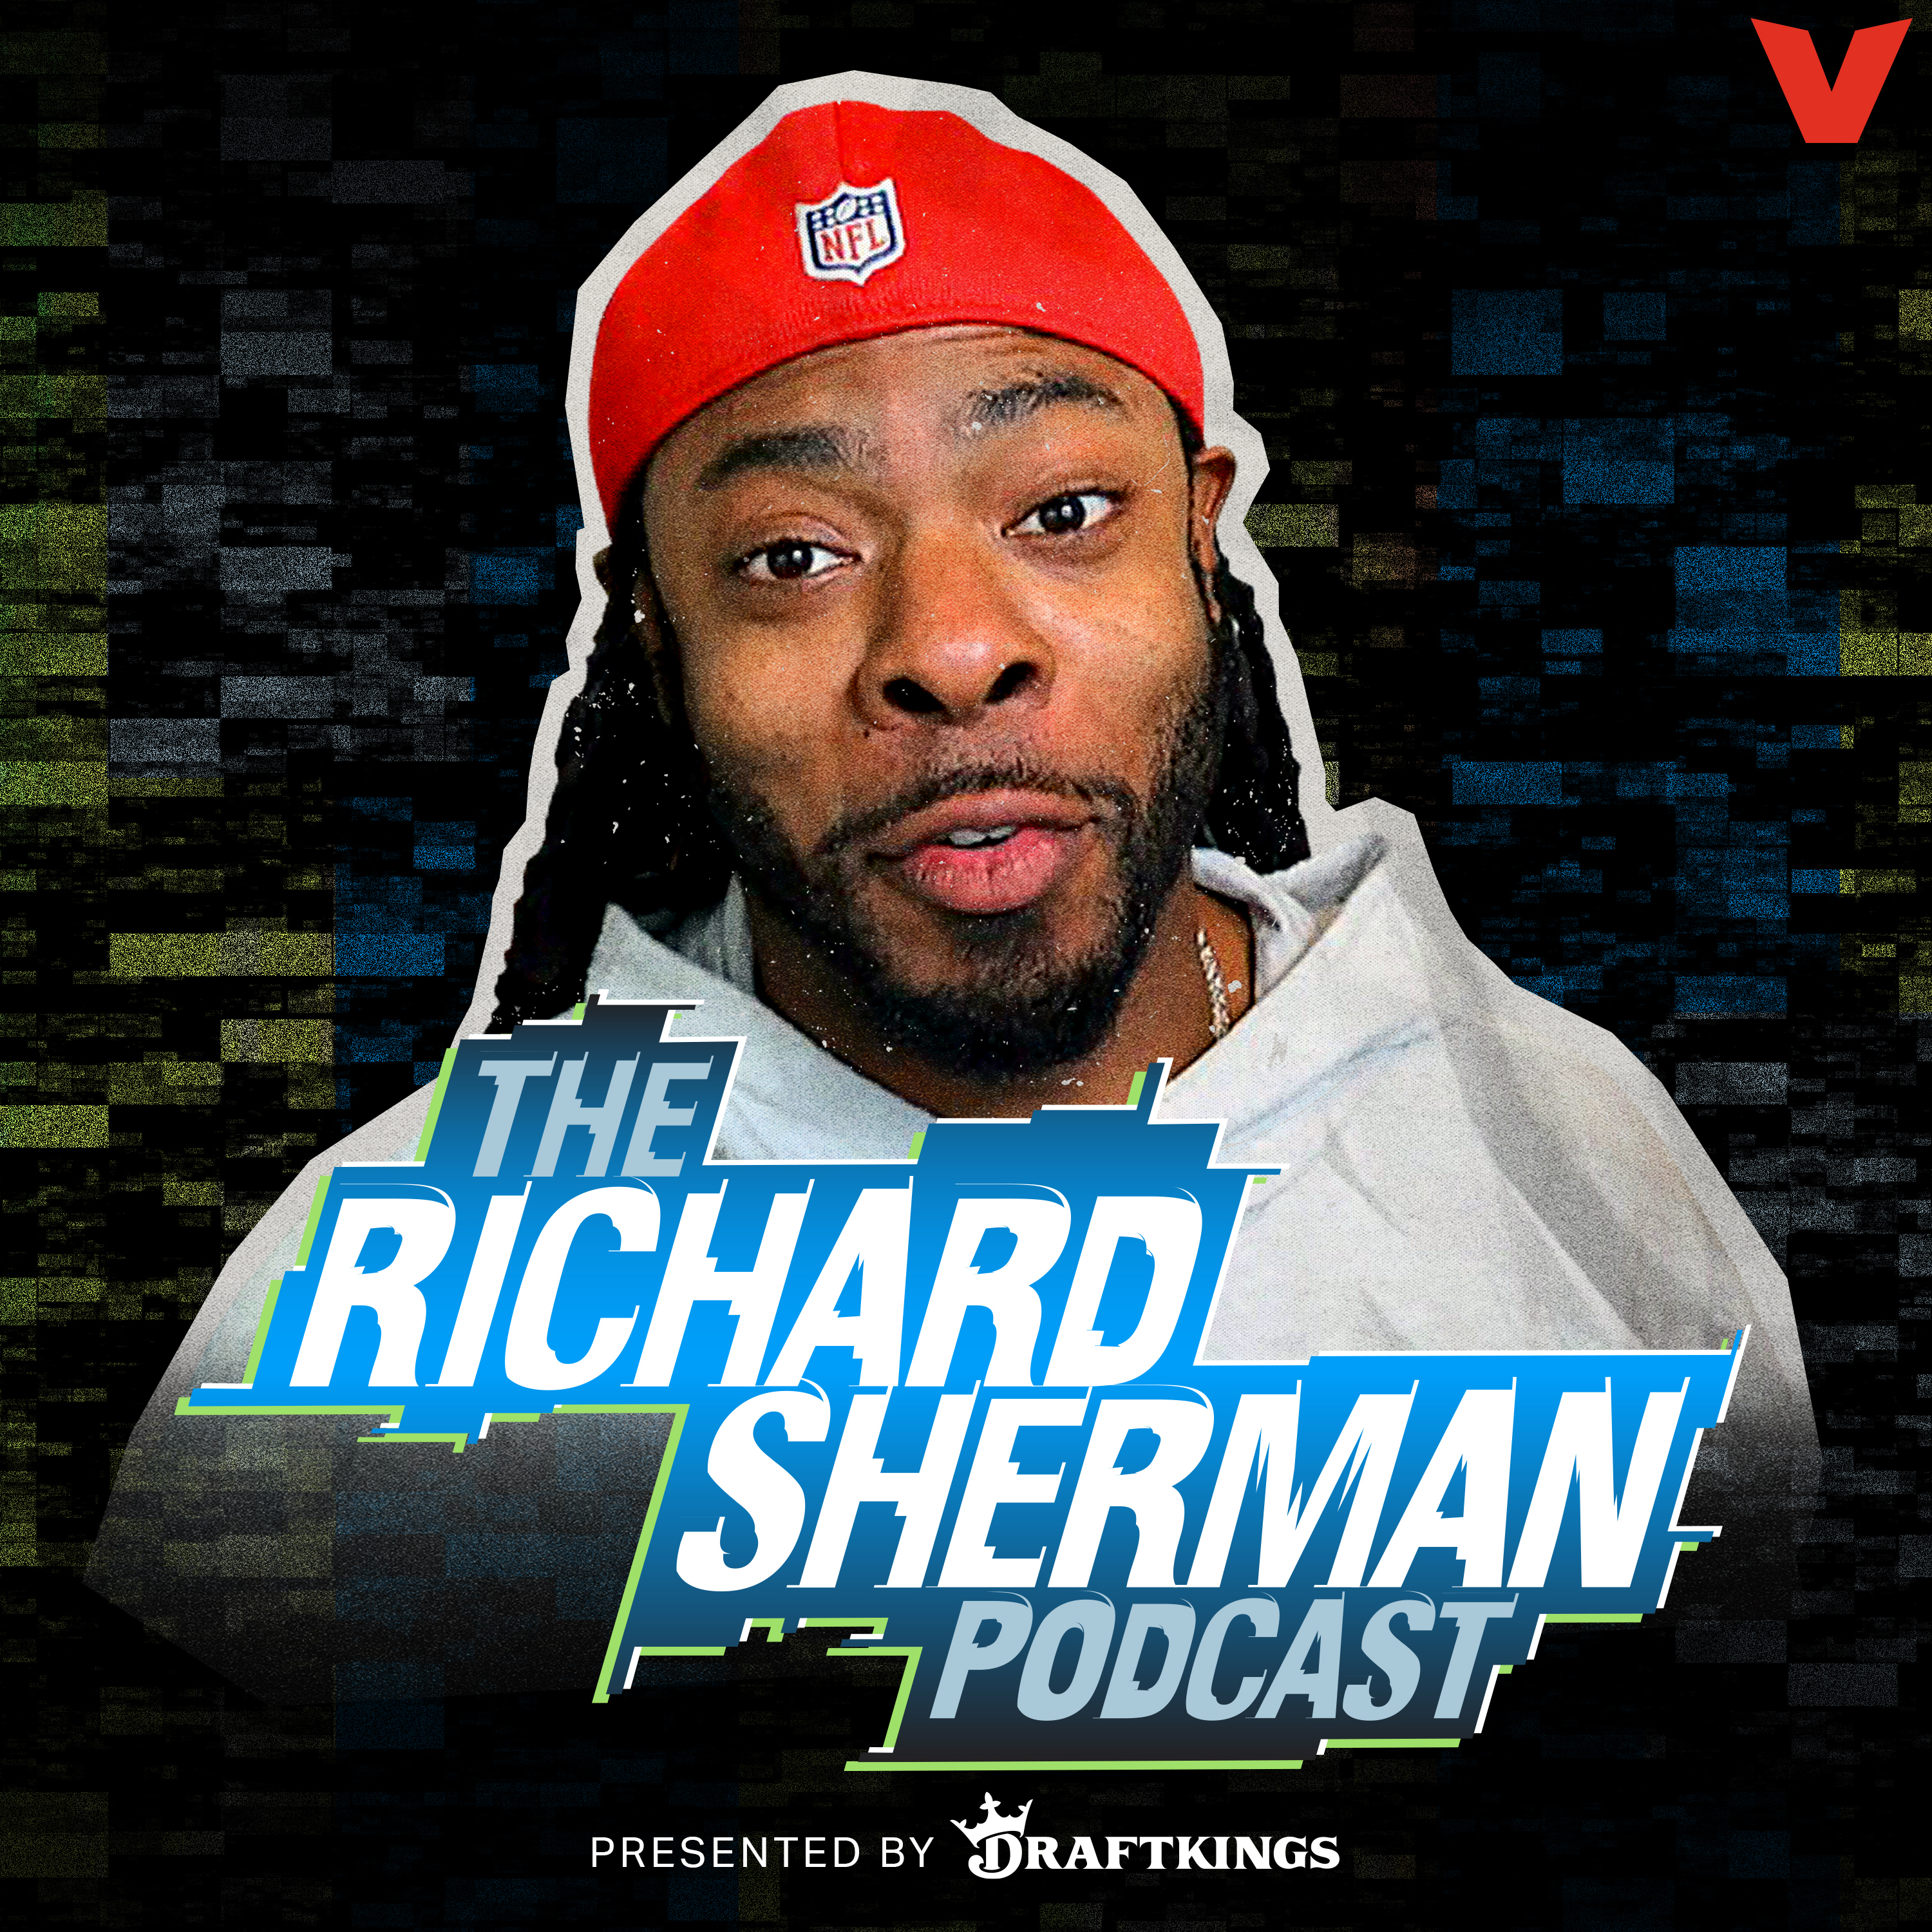 The Richard Sherman Podcast - Arik Armstead on Brock Purdy's haters, 49ers vs. Lions